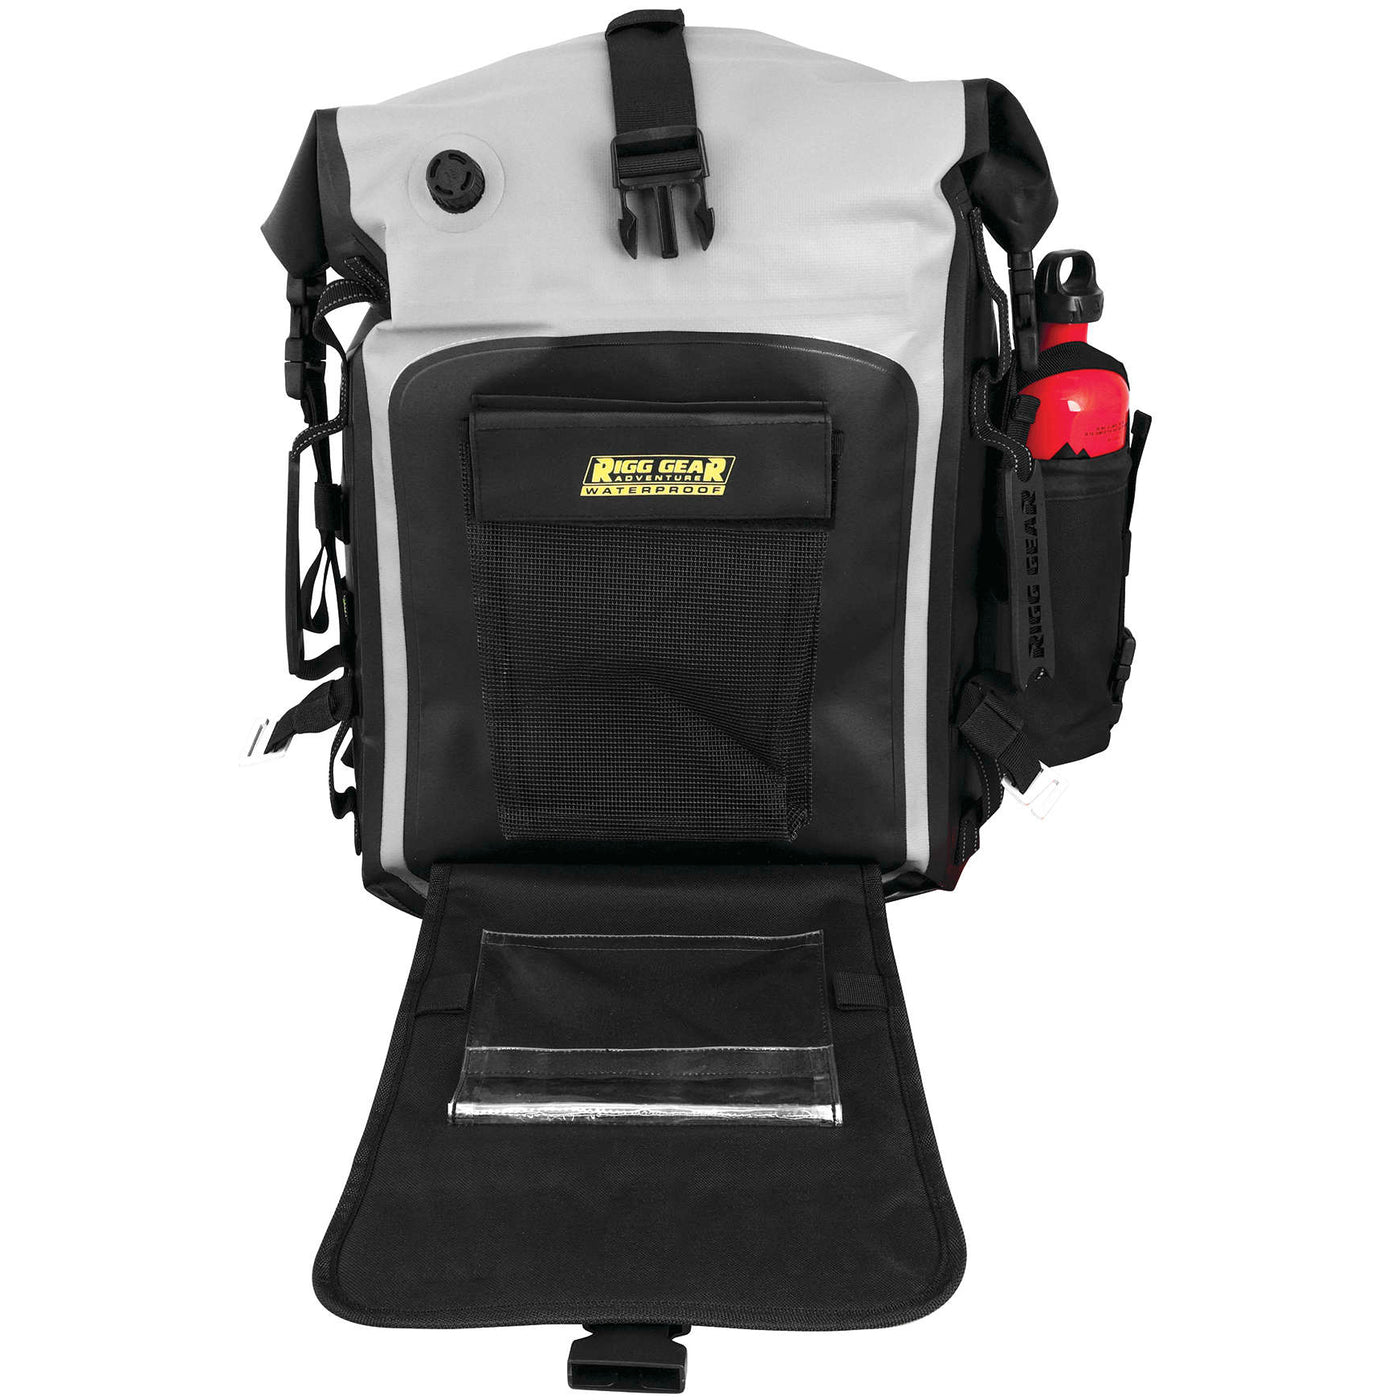 Nelson-Rigg Backpack/tail Pack 2.0